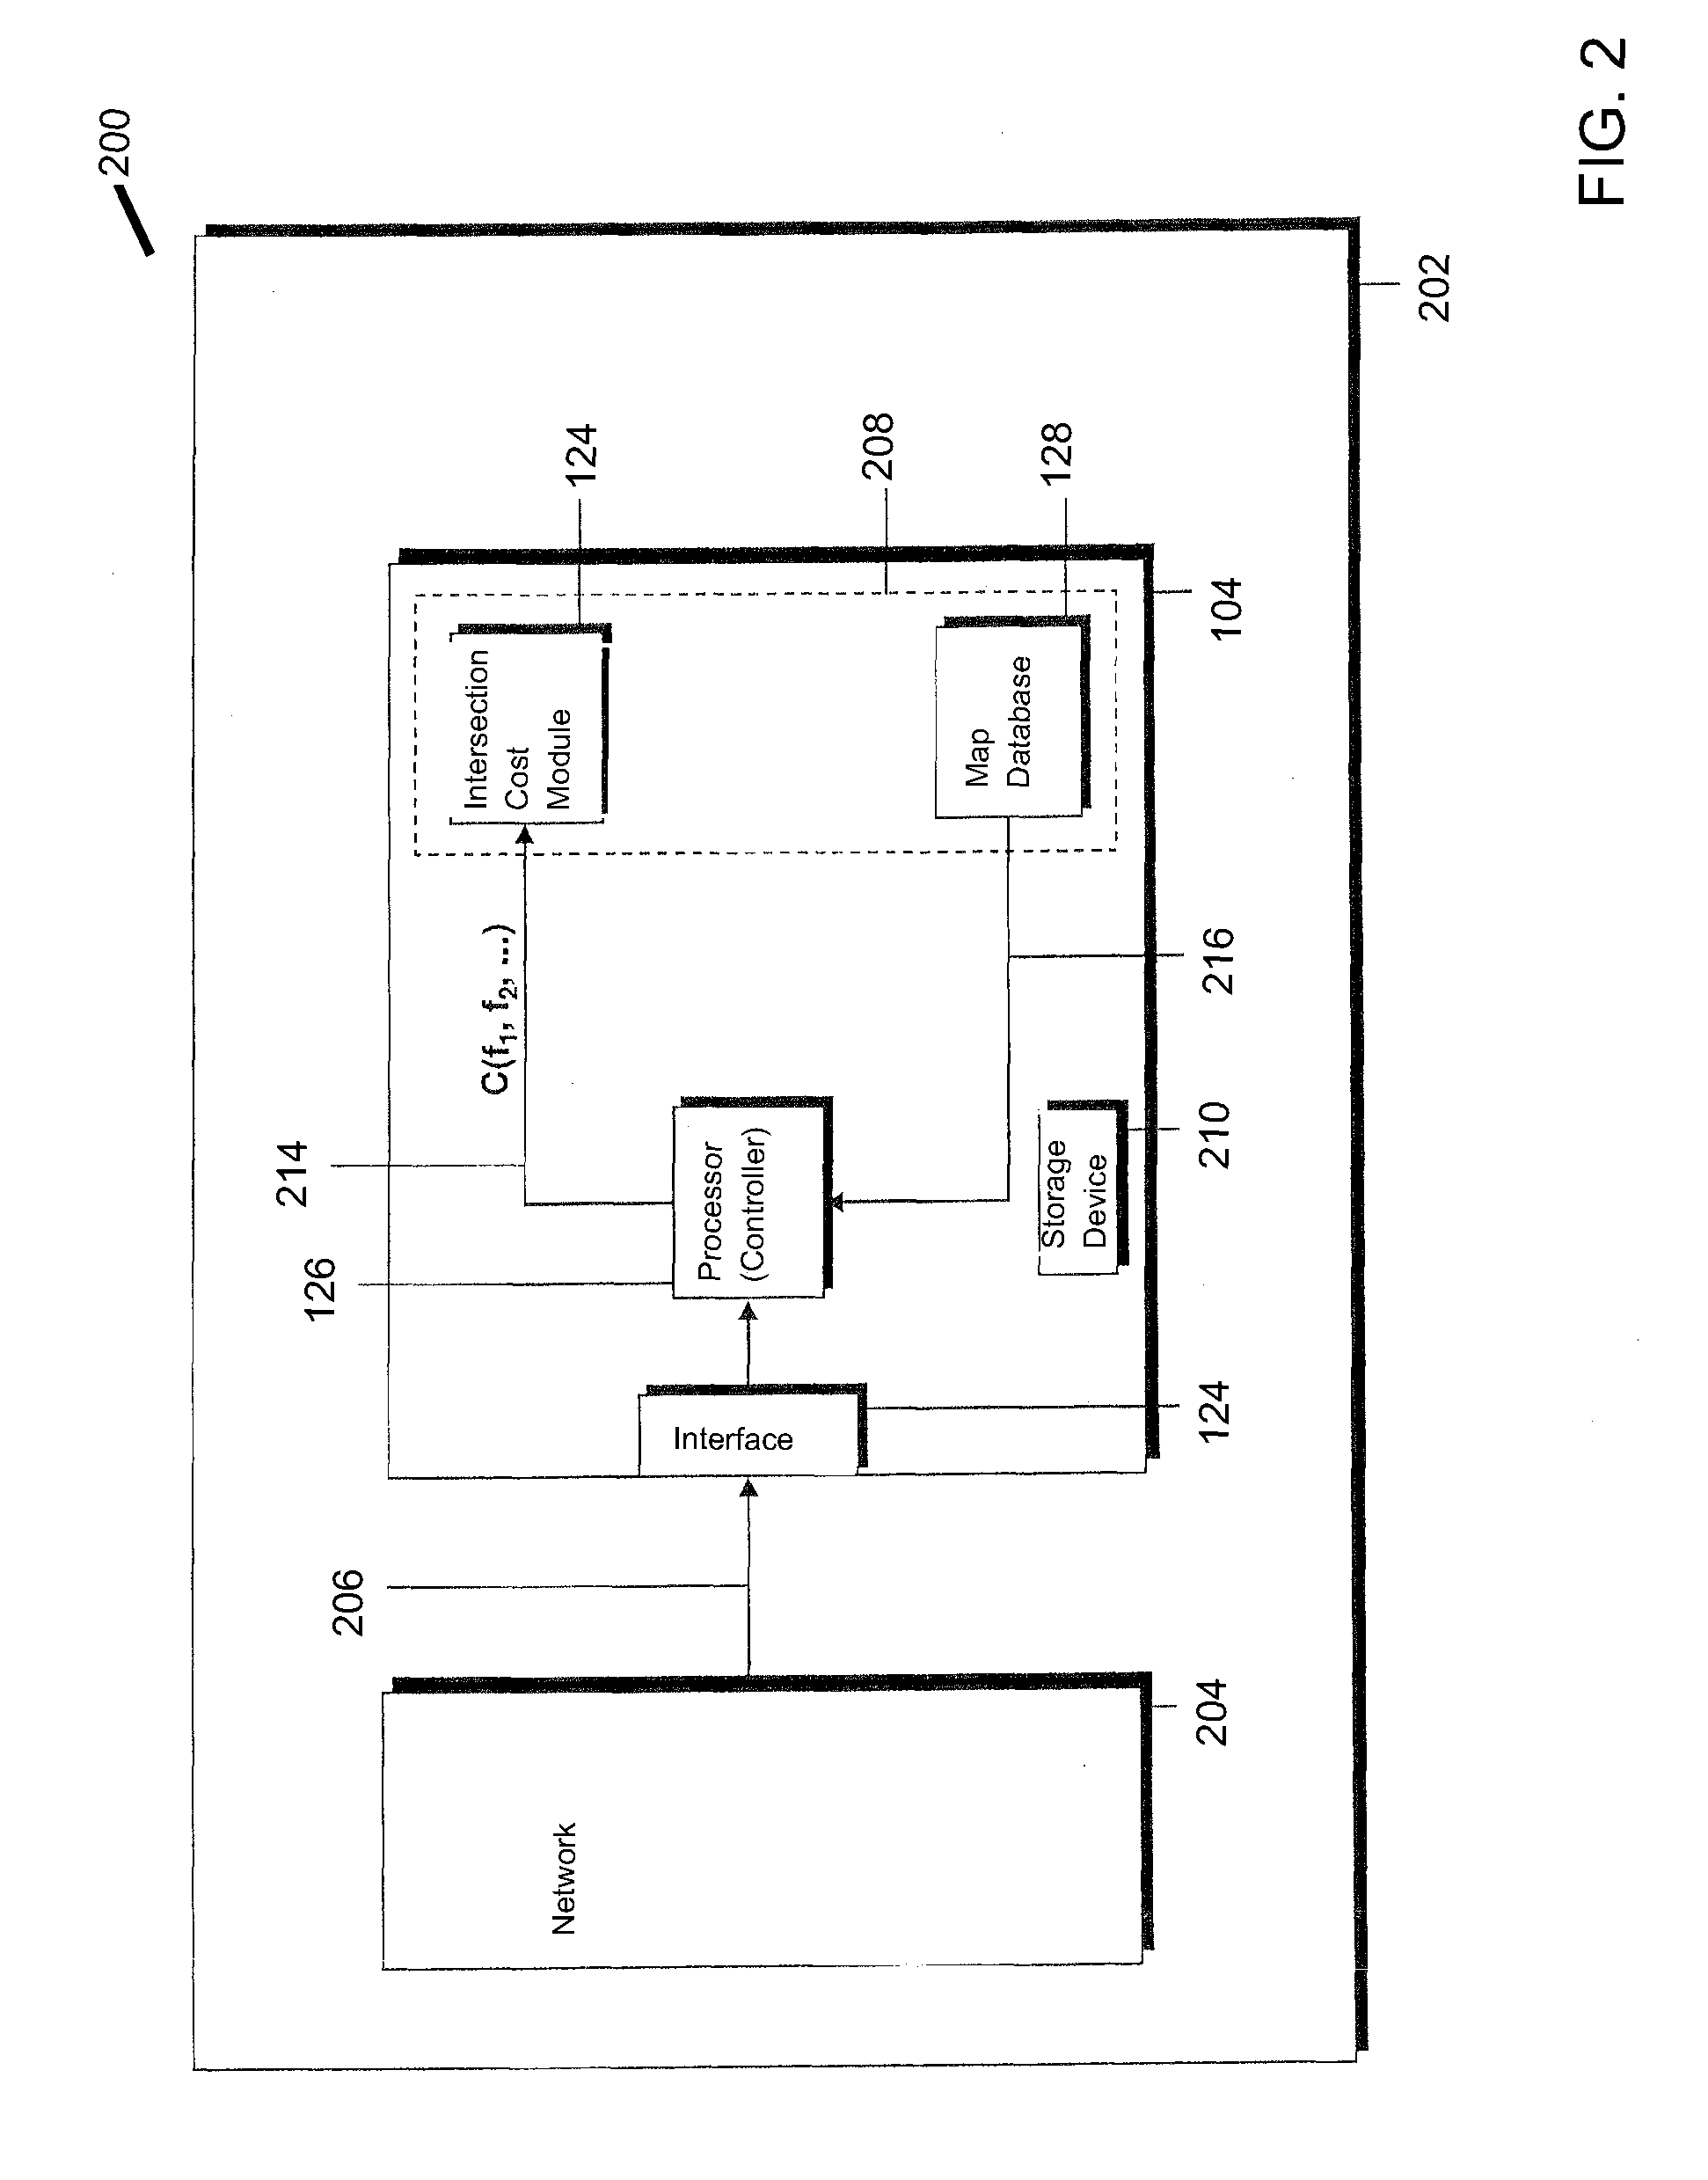 Providing cost information associated with intersections